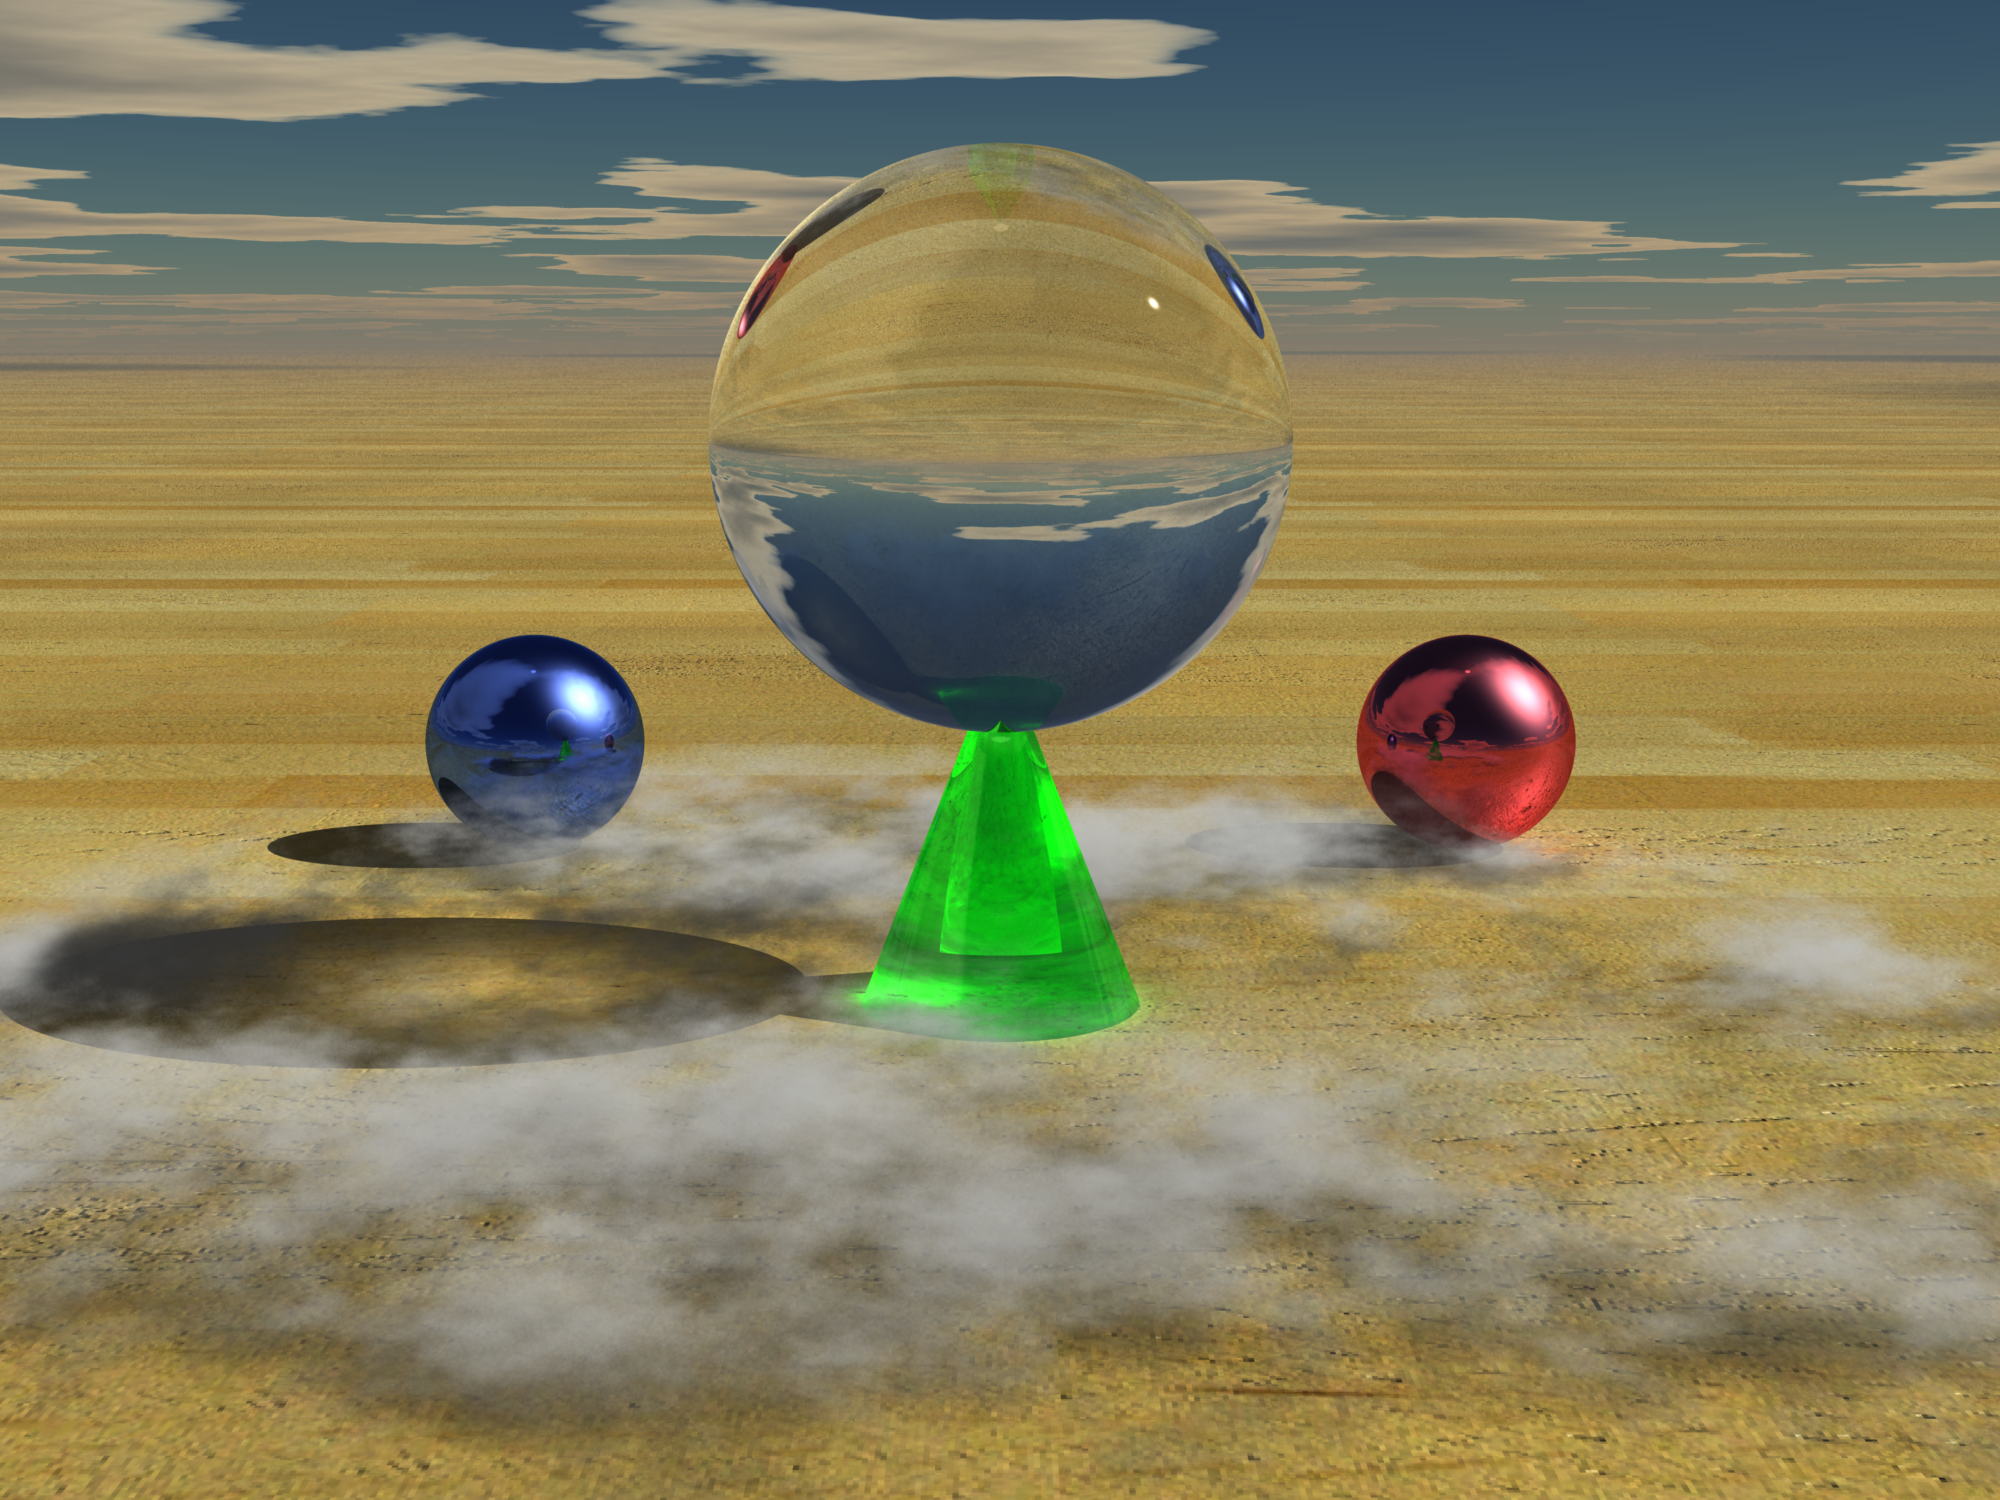 Spheres on a plane